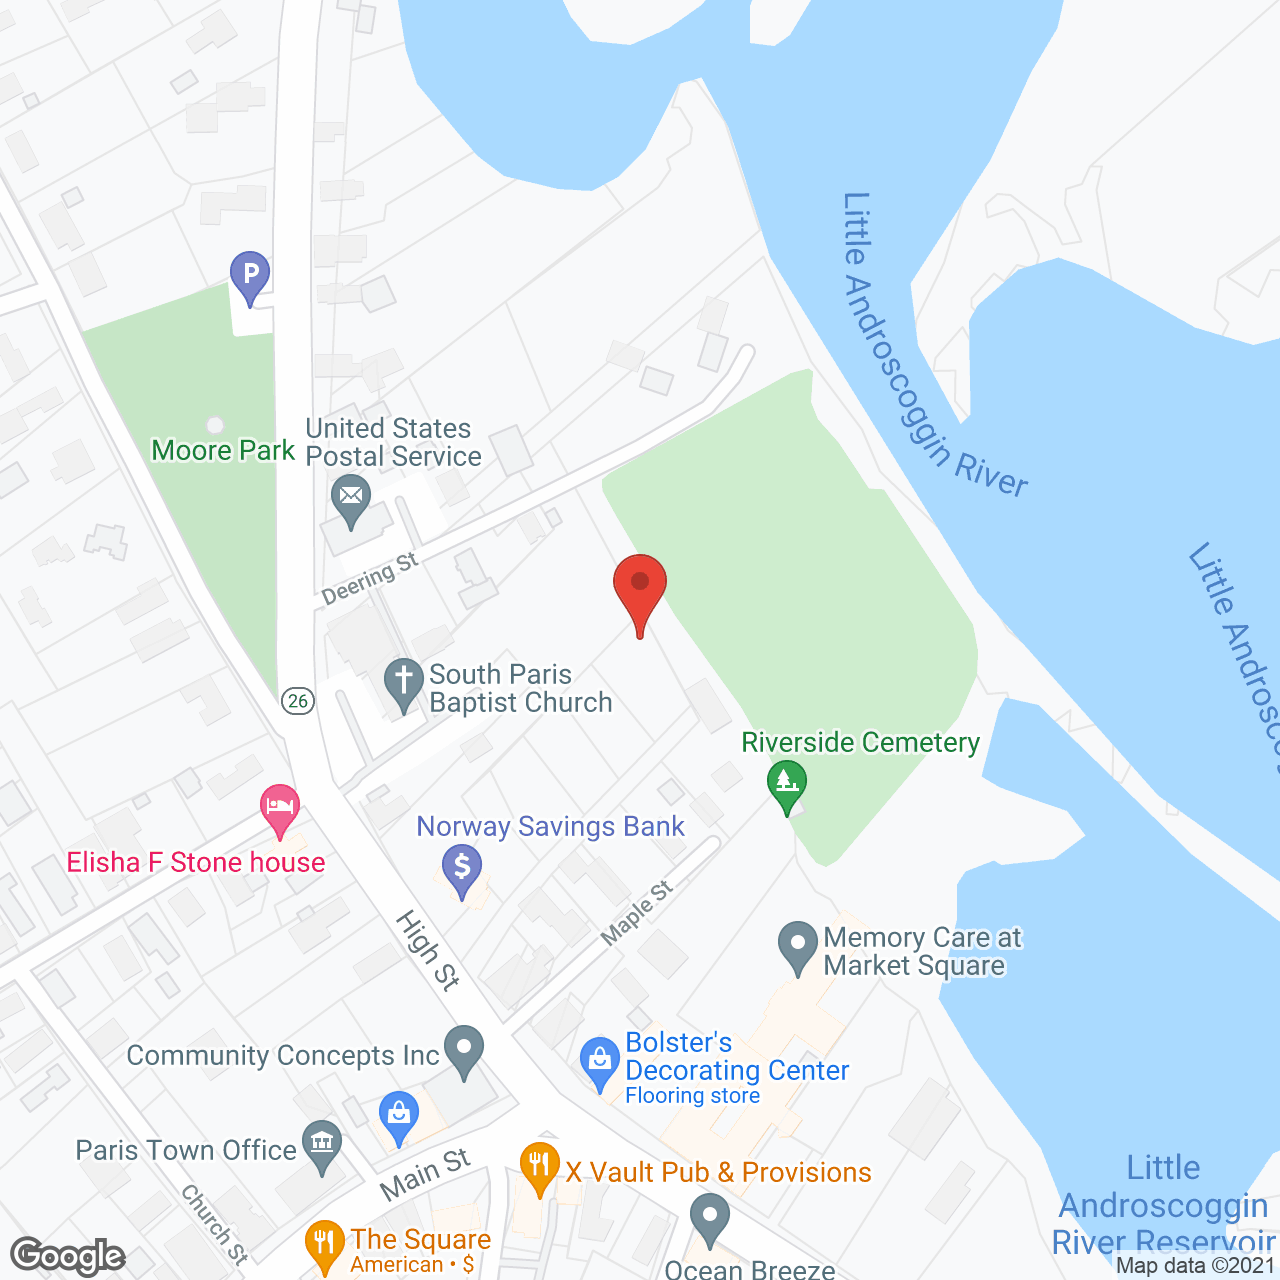 Memory Care at Market Square in google map